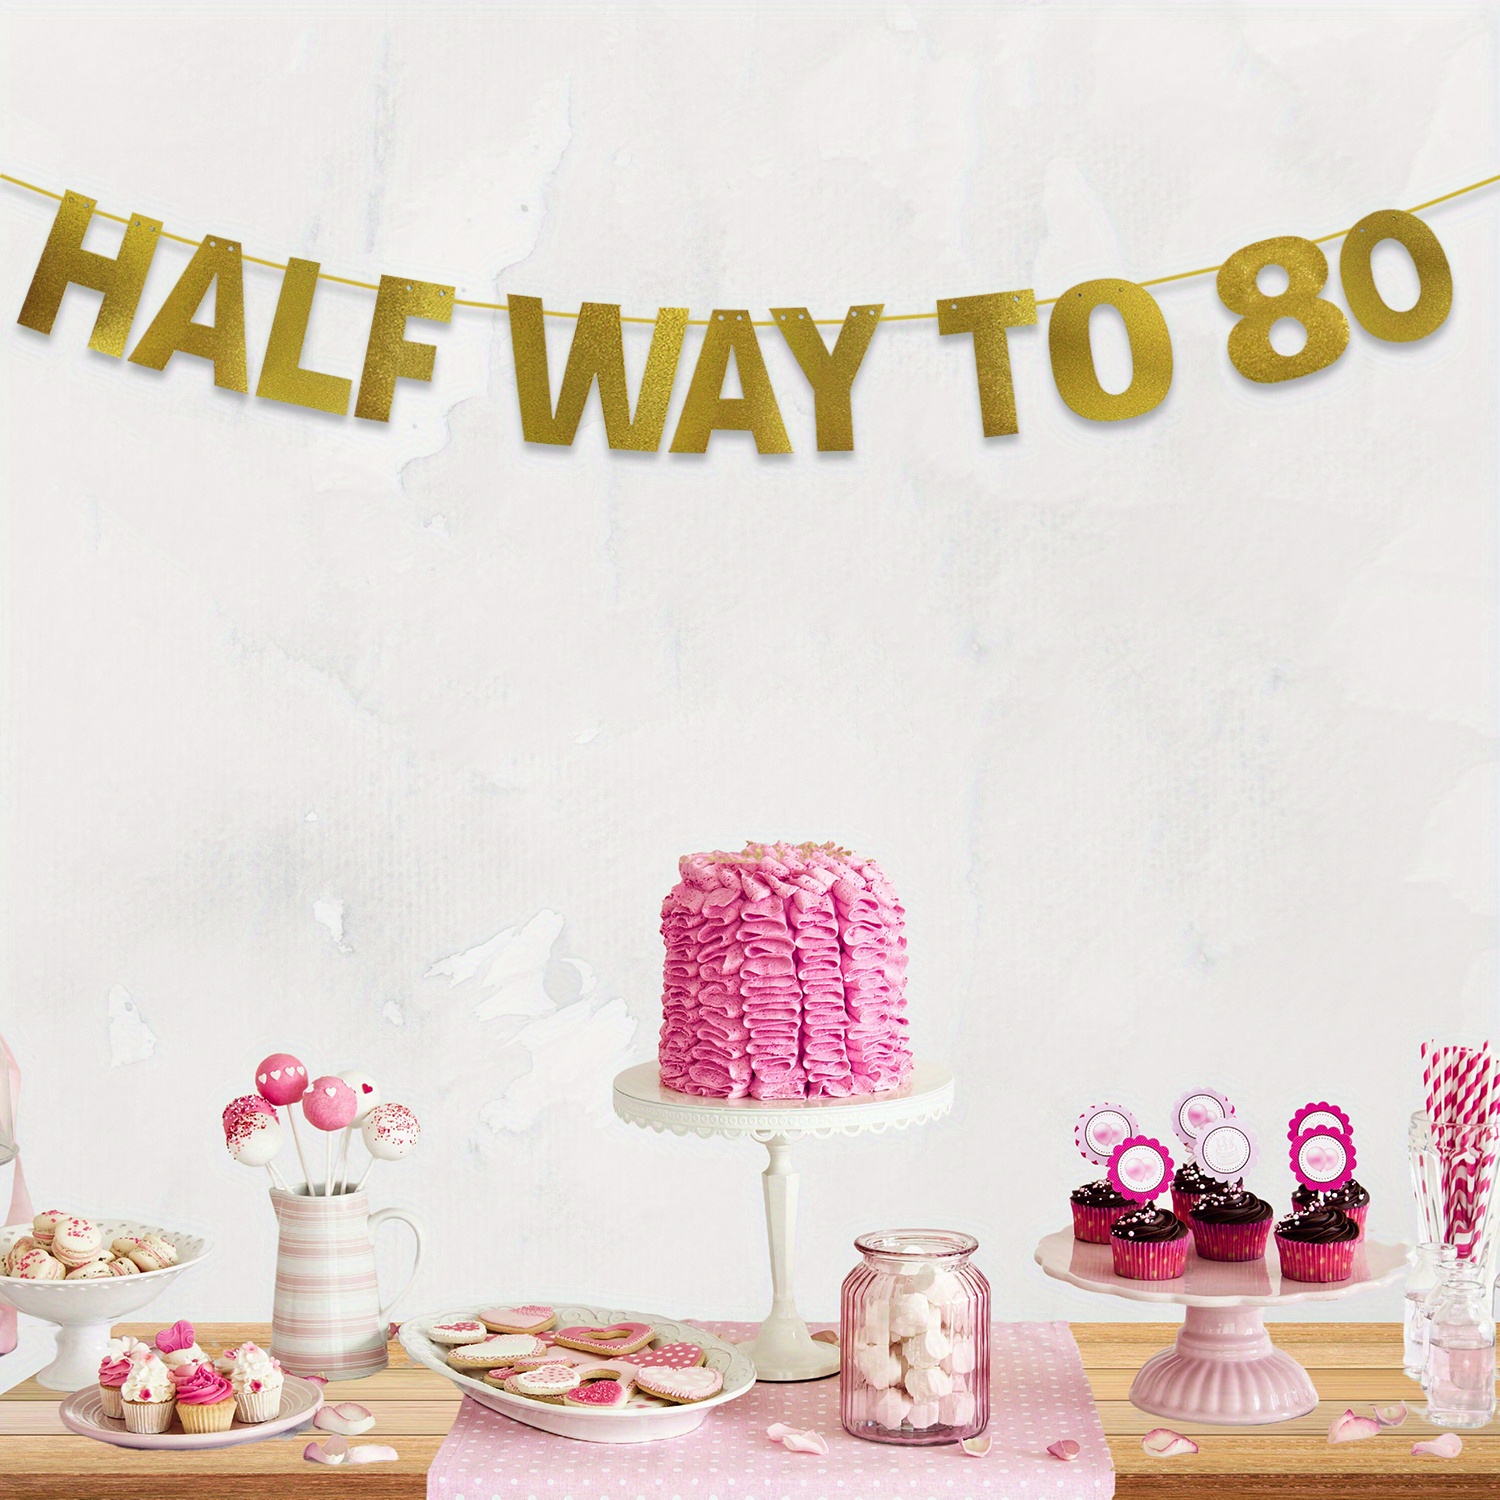 

Set, Half Way To 80 Gold Glitter Banner - Happy 40th Birthday Party Banner - 40th Birthday Party Decorations And Supplies - 40th Wedding Anniversary Decorations